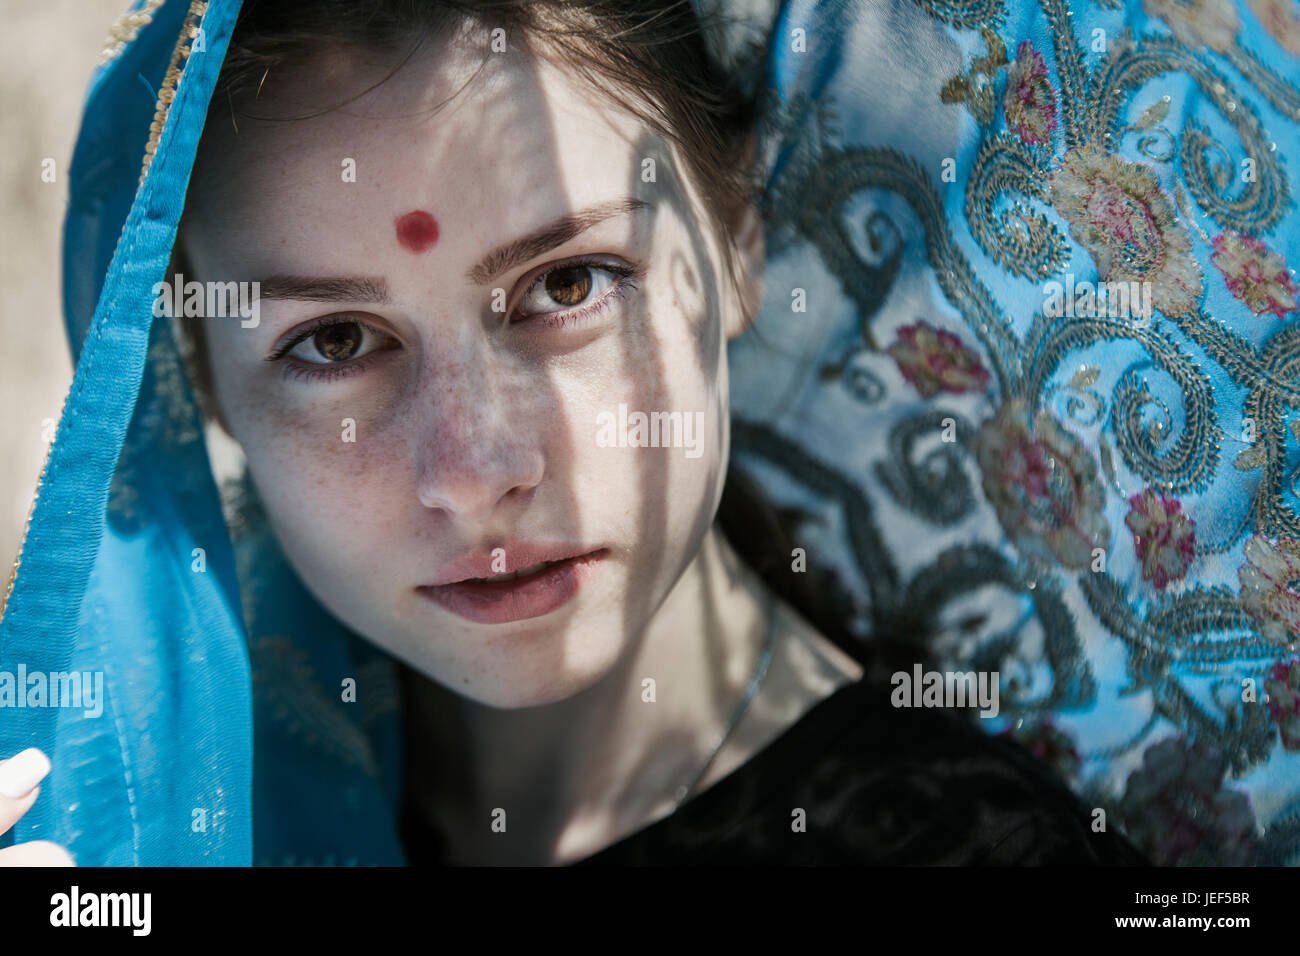 The girl the European covered with a sari, a faces portrait Stock Photo